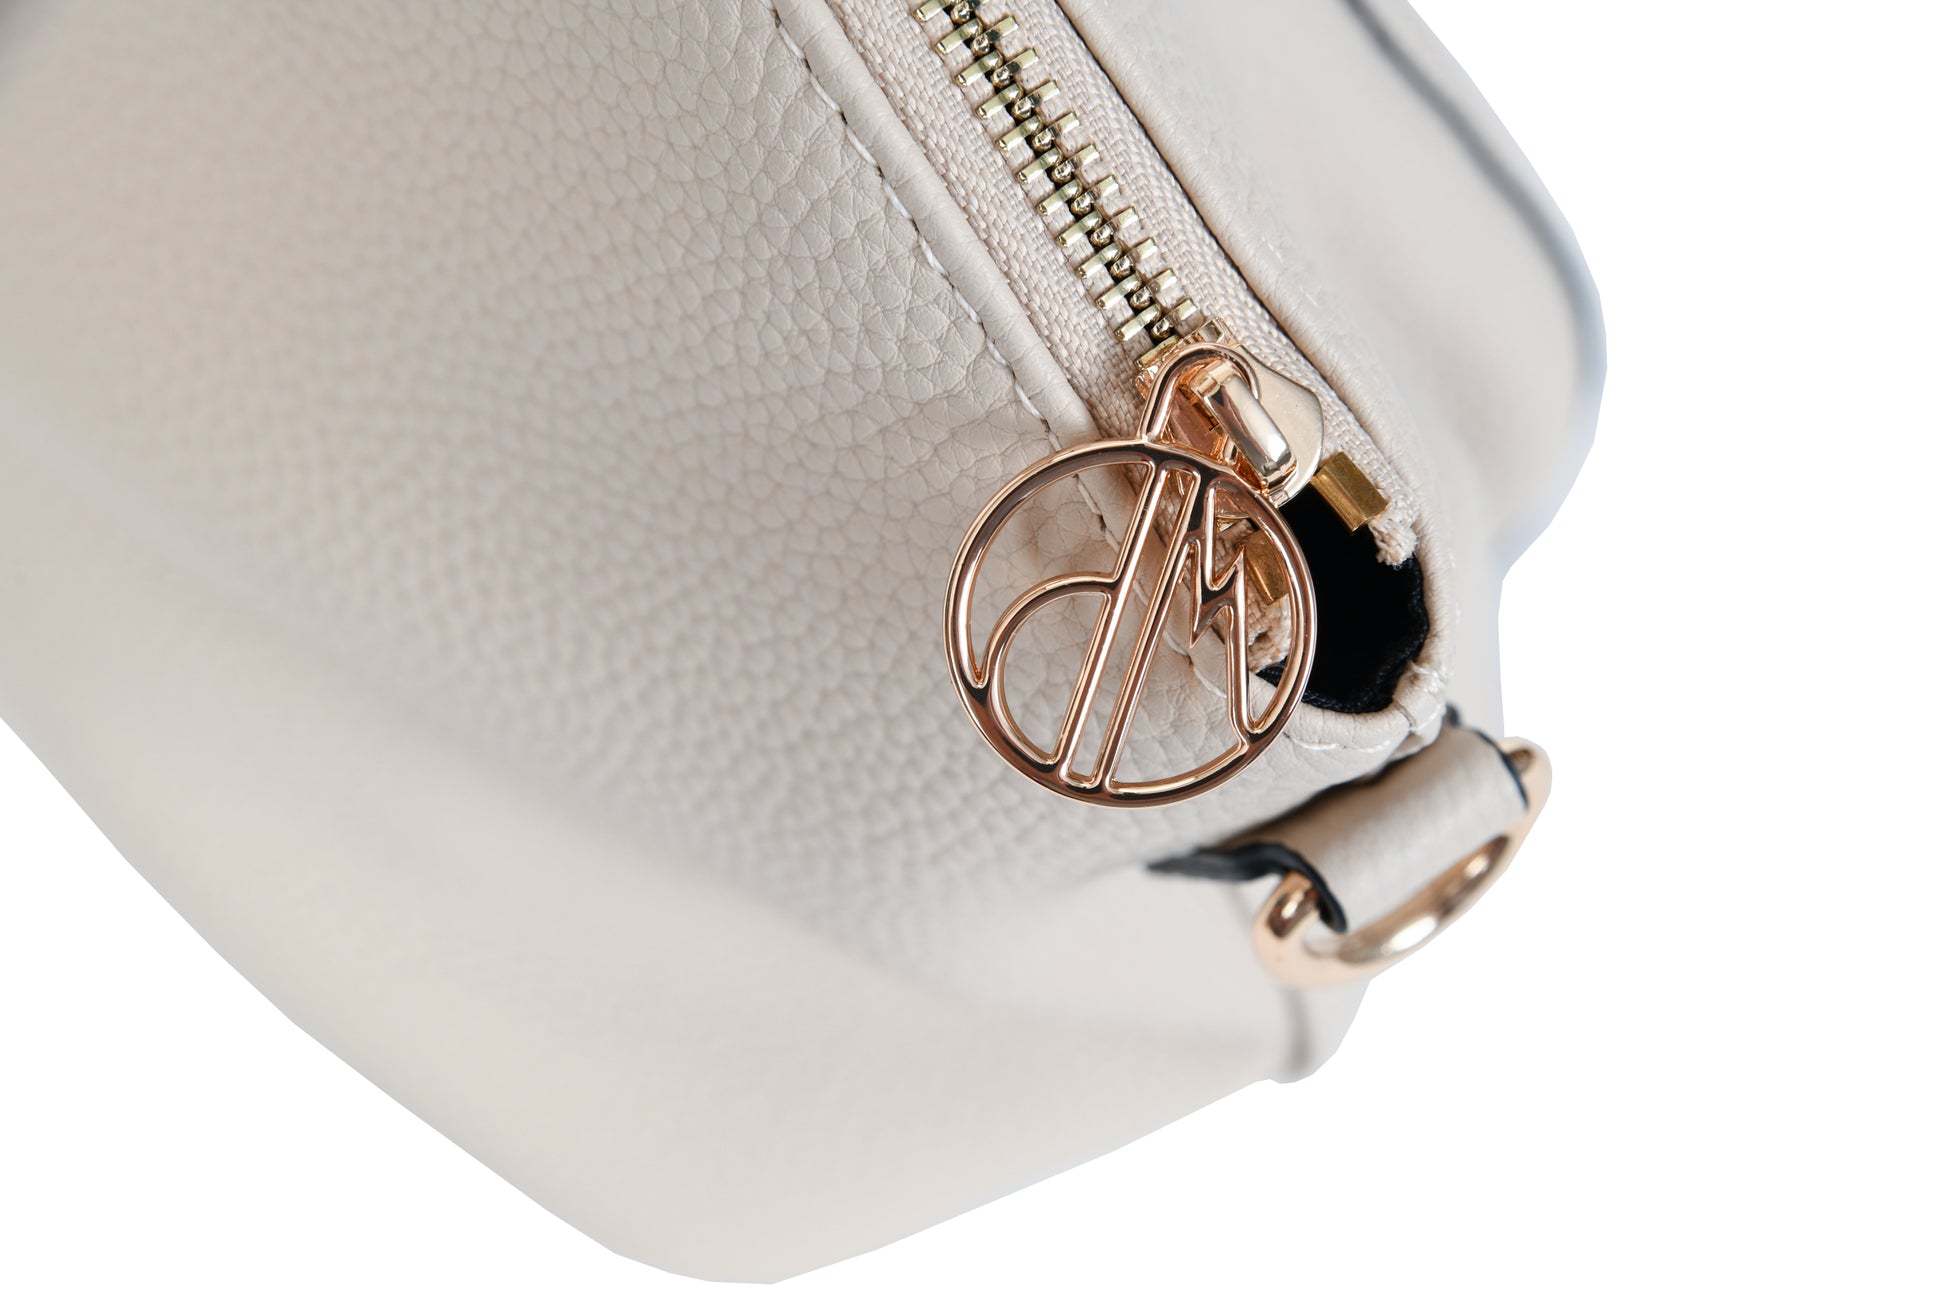 Bali Pebble Grain Leather Cream White Handbag made by Dewi Maya gold zipper pull available at the best boutique in Upstate South Carolina Spartanburg Greenville Dewi Maya Boutique